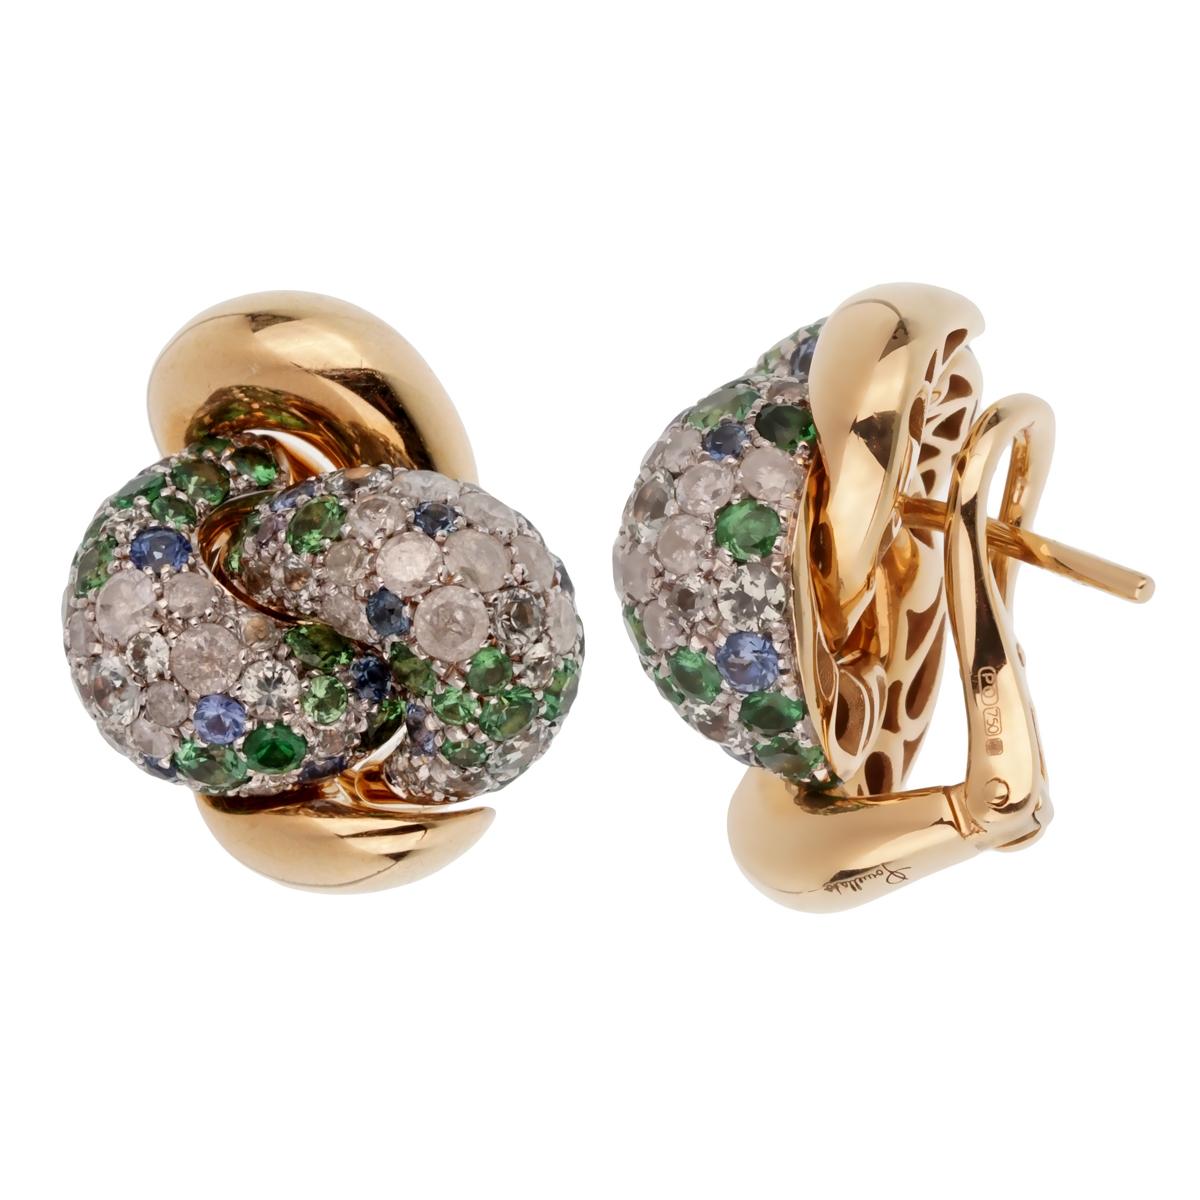 A fabulous set of brand new Pomellato rose gold diamond, and multicolor sapphire earrings. The diamonds weight 1.46ct surrounded by 1.50ct of sapphires in 18k rose gold.

Pomellato Retail Price: $16,900
Sku:2198